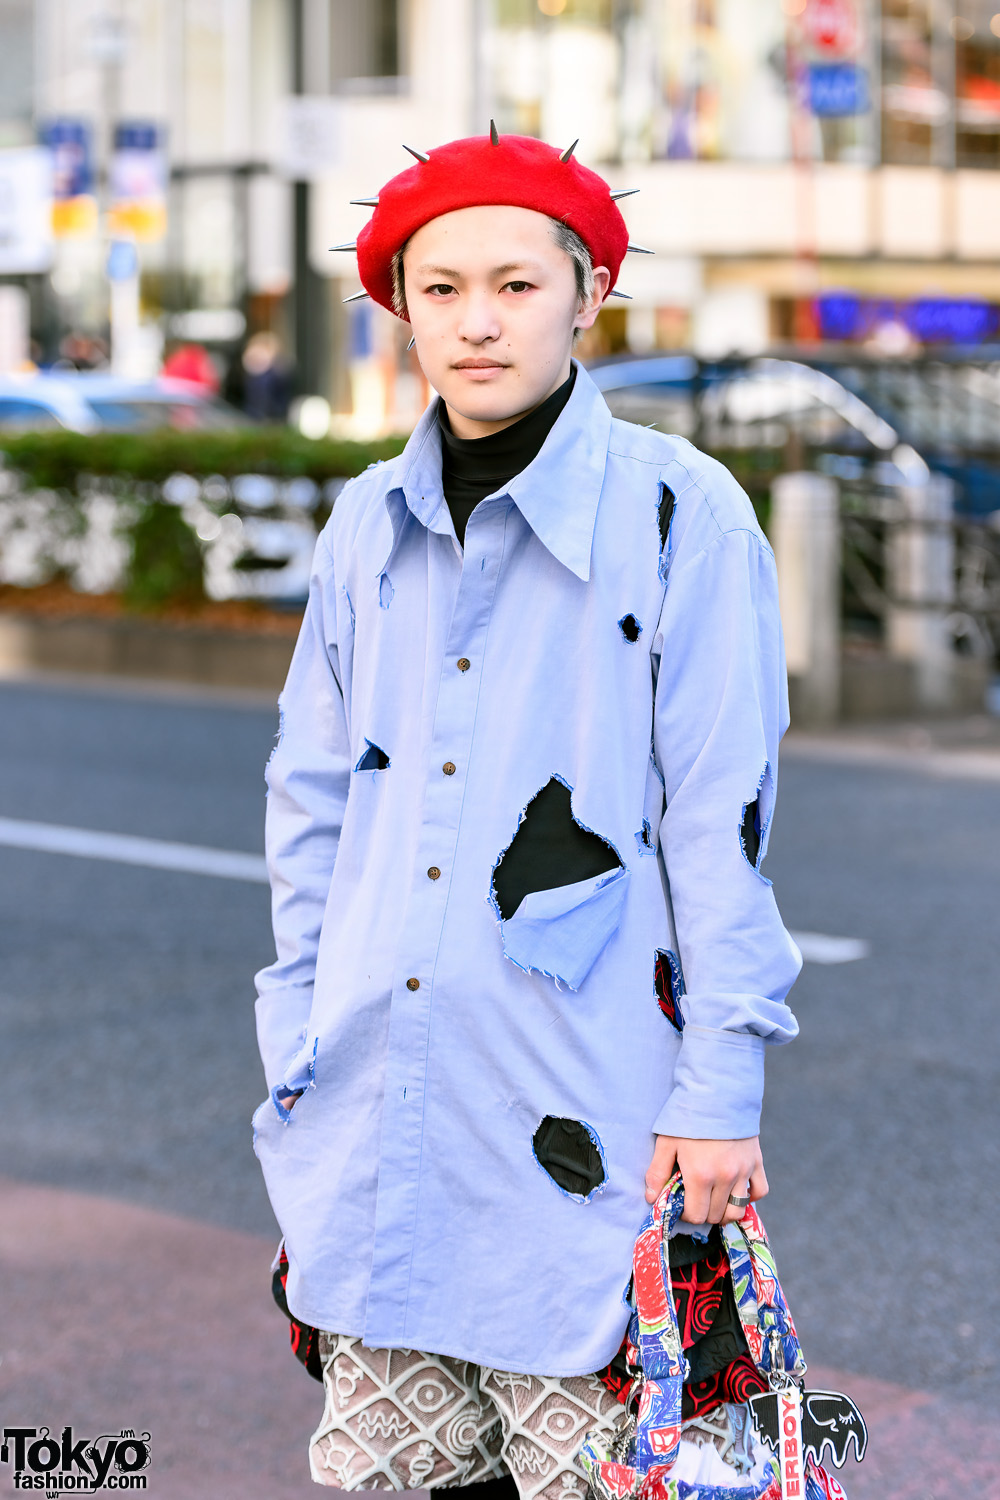 Charles Jeffrey Loverboy Street Style w/ Spiked Beret, Ripped Shirt ...